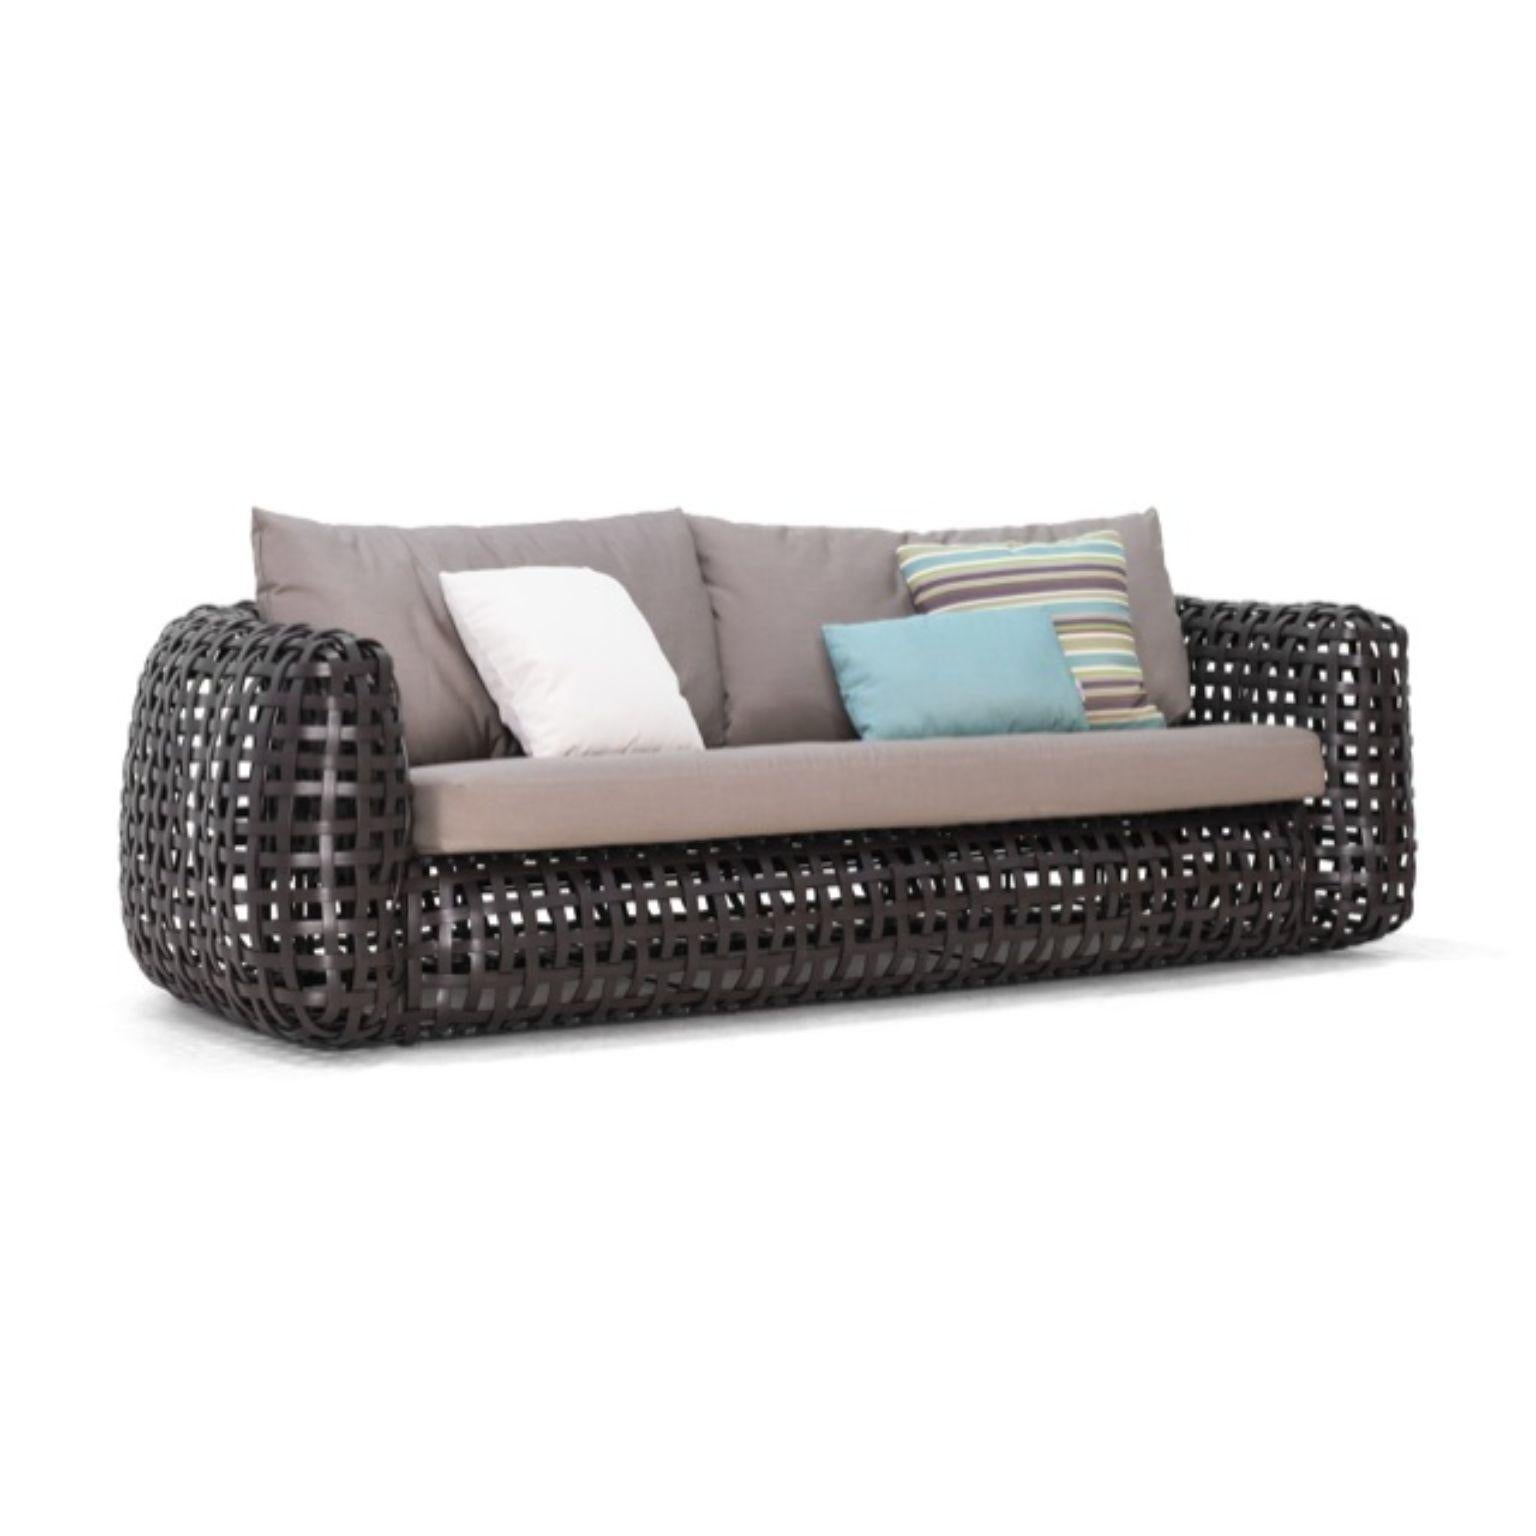 Outdoor Matilda sofa by Kenneth Cobonpue.
Materials: Polyethelene. Aluminum.
Also available in other colors and for indoors.
Dimensions: 100cm x 230 cm x H 63cm.

The same principle of a woven basket is used in making Matilda. This vast